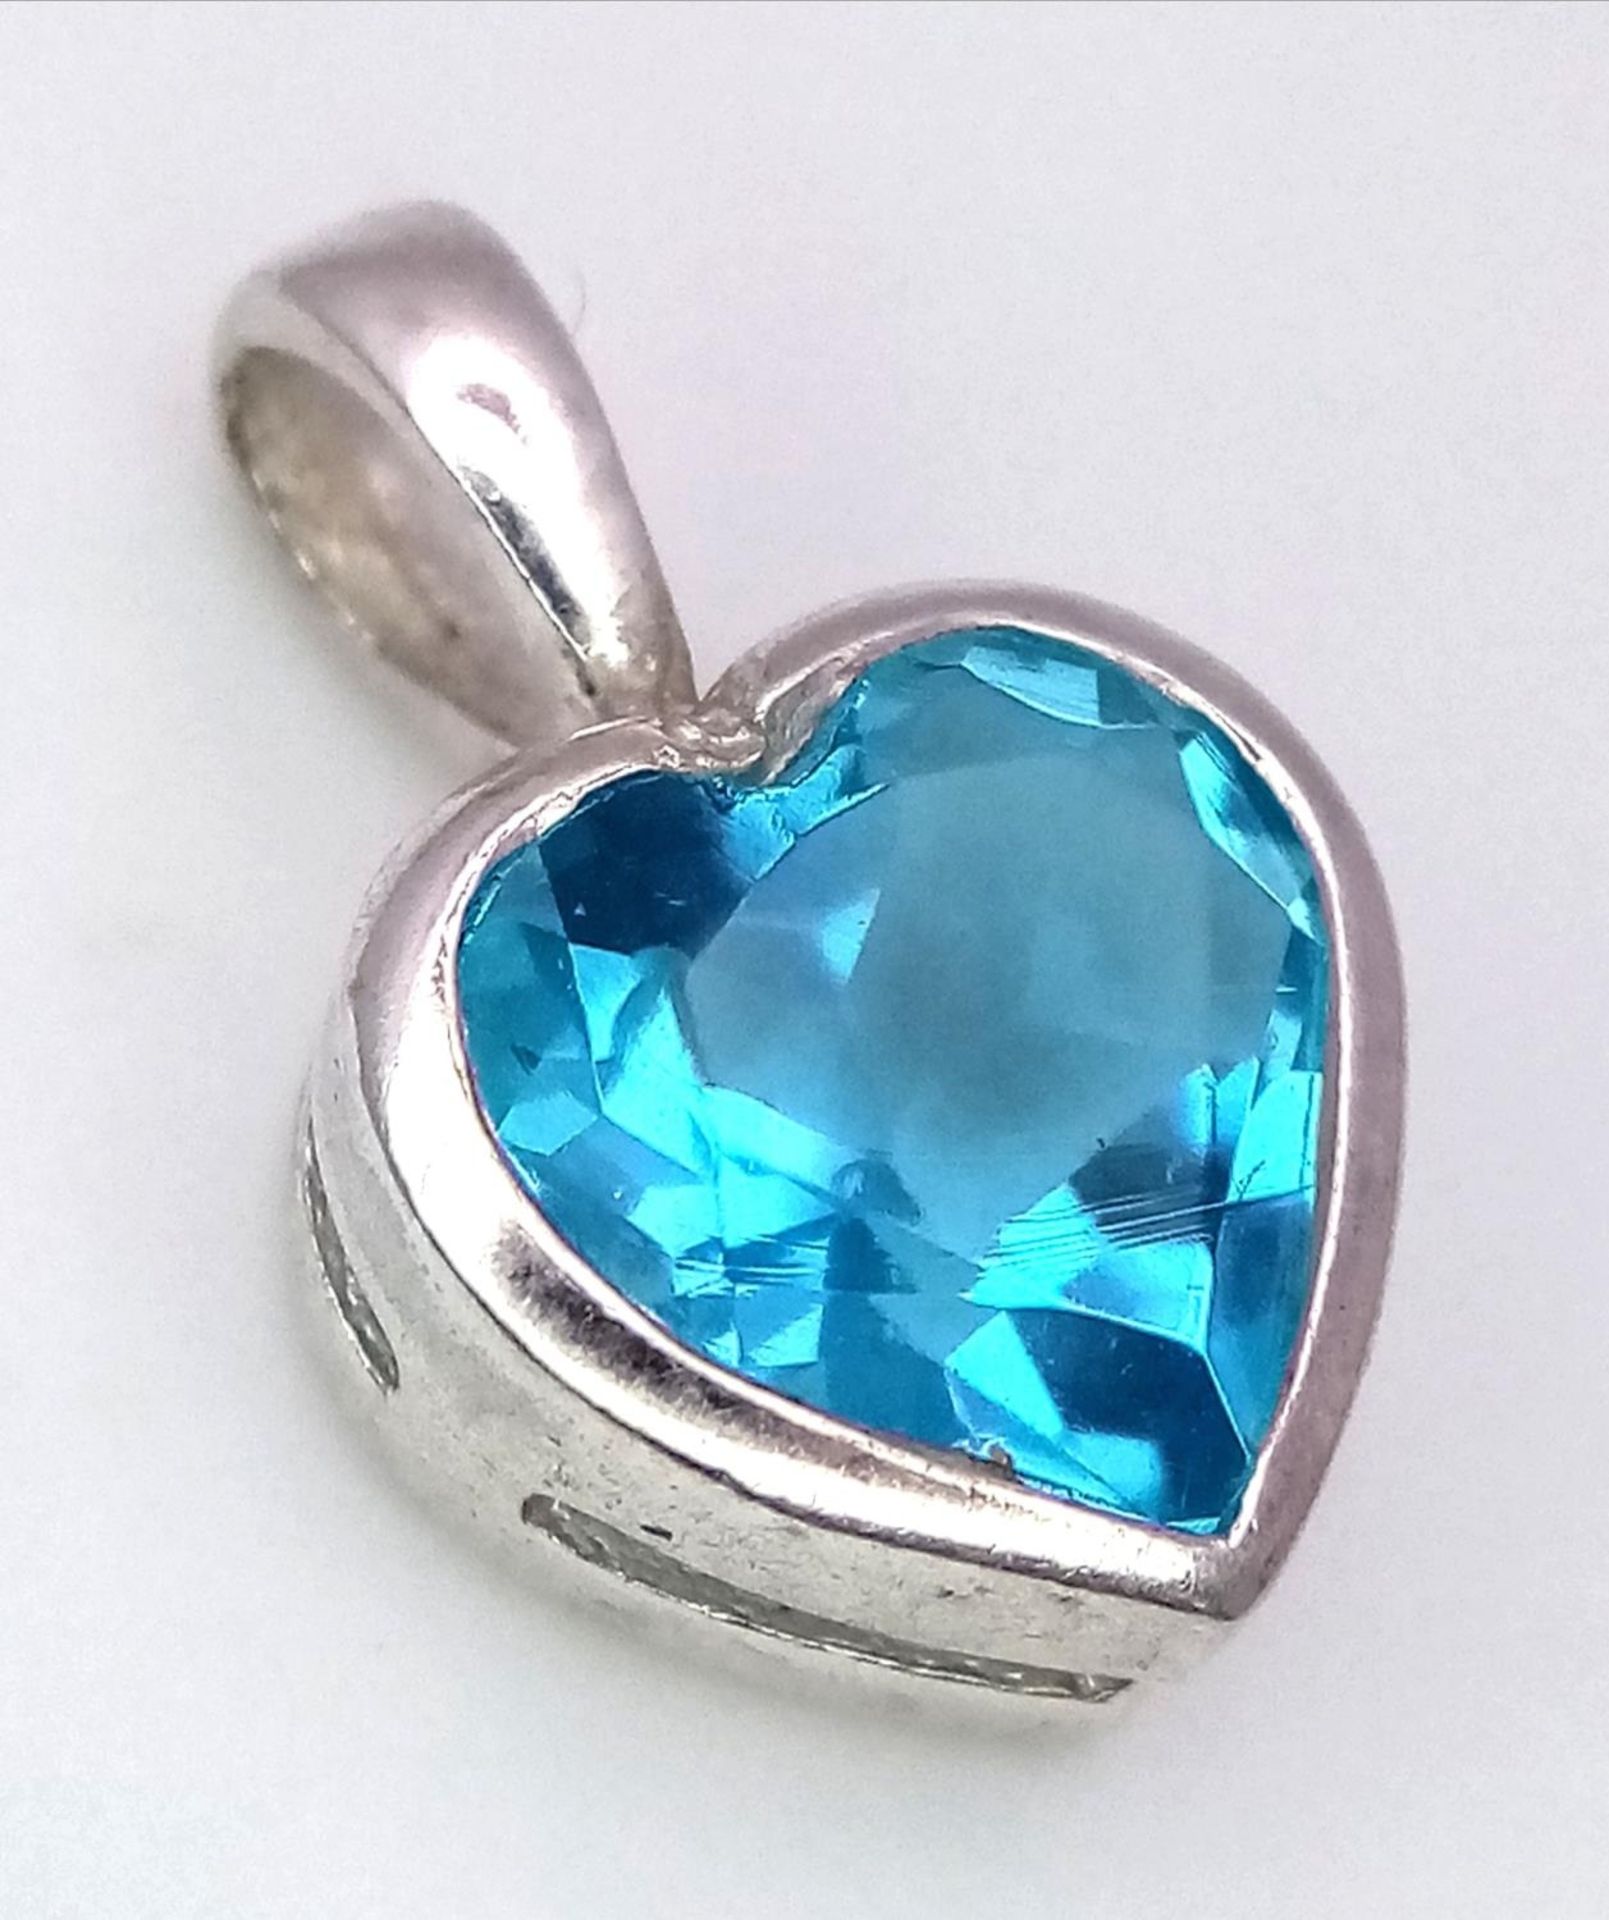 A Blue Topaz Heart Pendant on 925 Silver. 1.7cm length, 1.62g total weight.